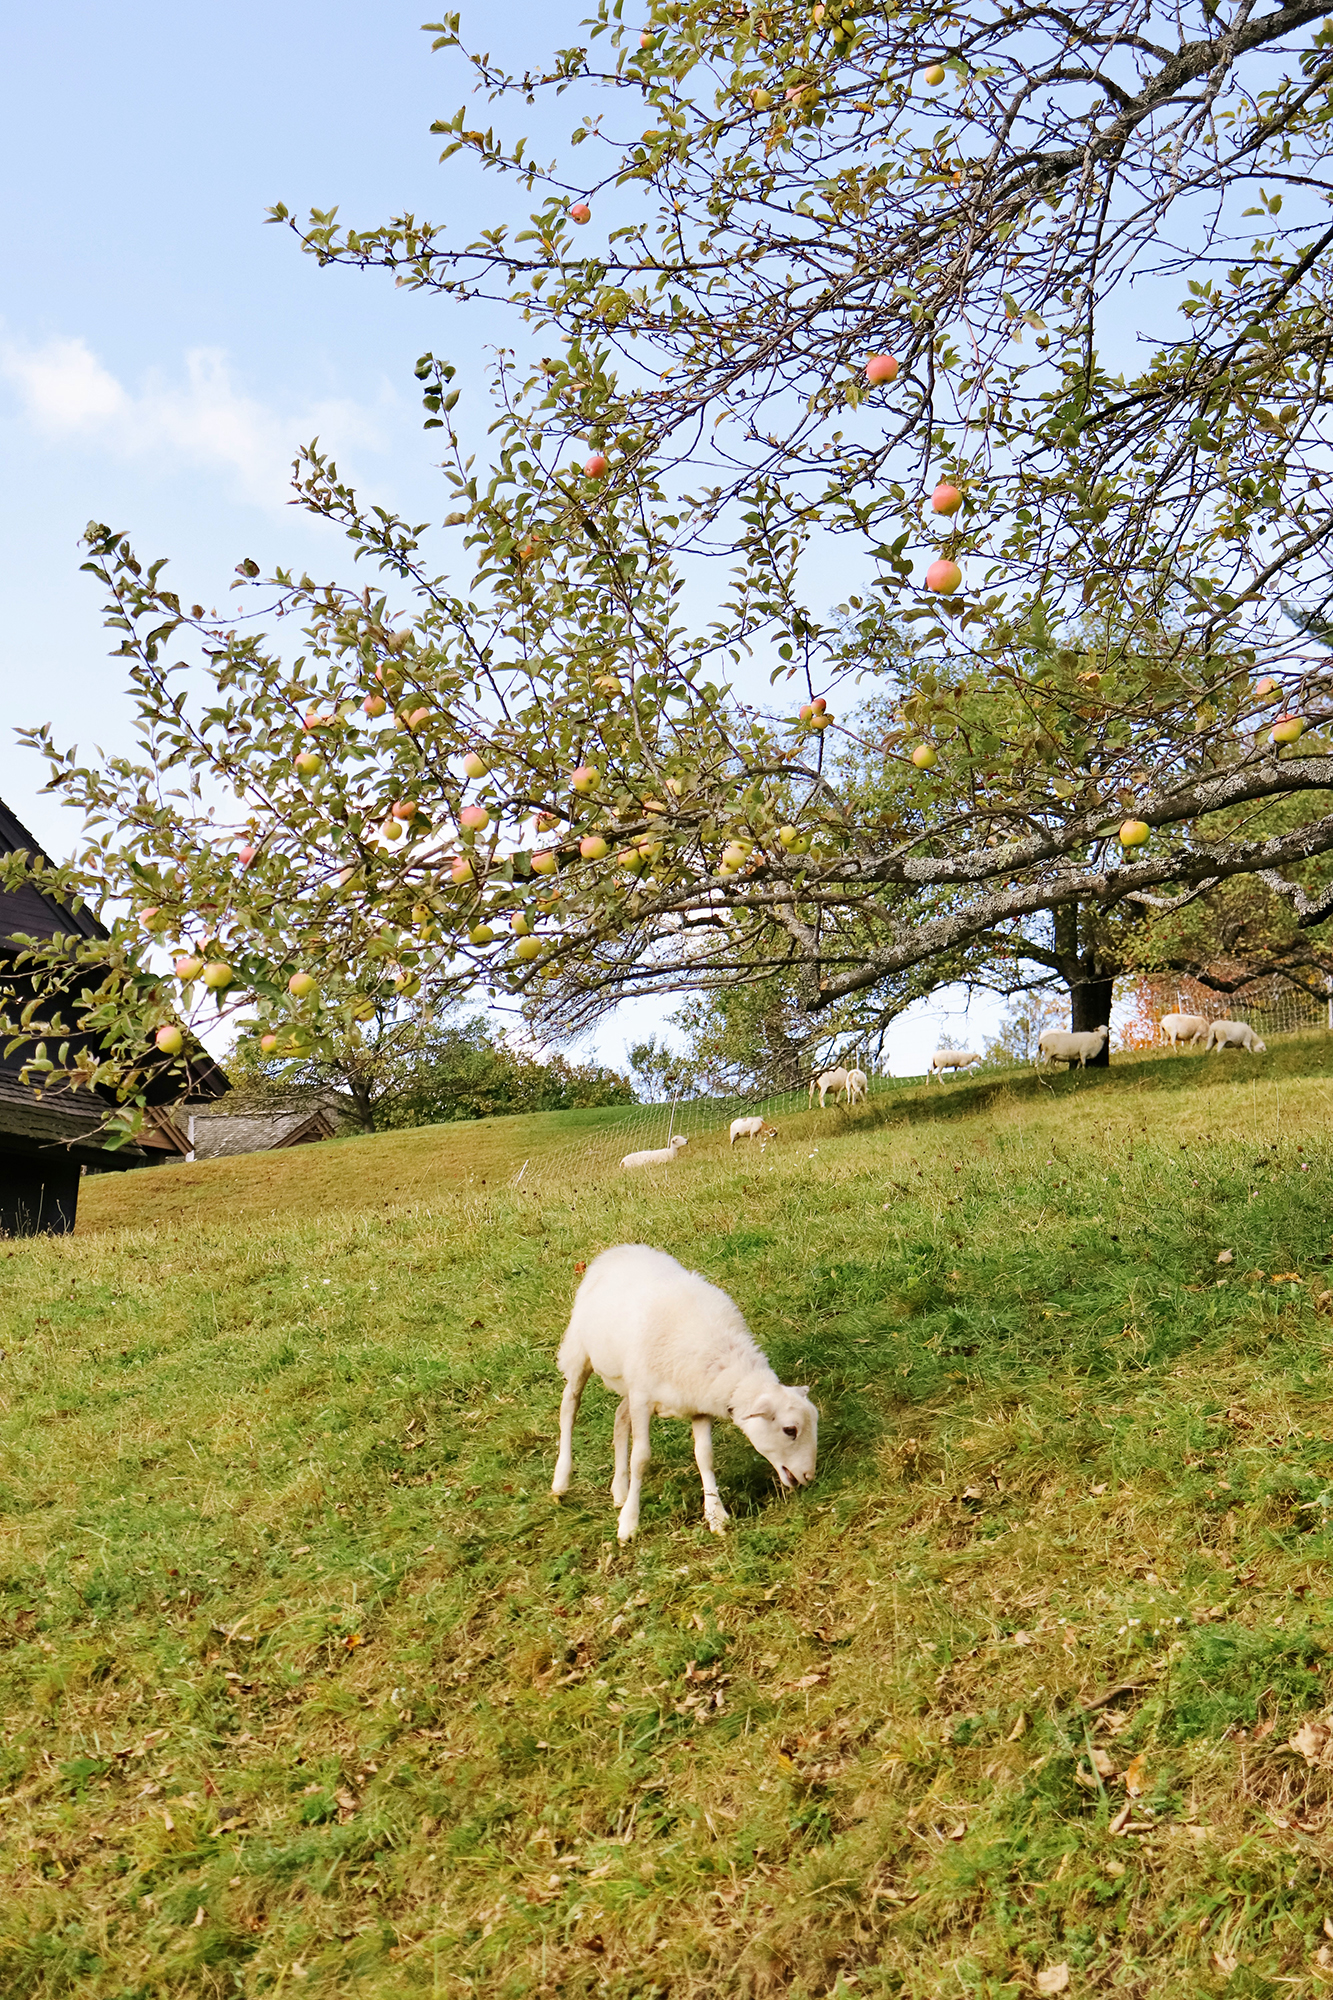 Adorable sheep grazing at the Von Trapp Family Lodge. While Leaf Peeping in Vermont 2019. | Kristy Wicks